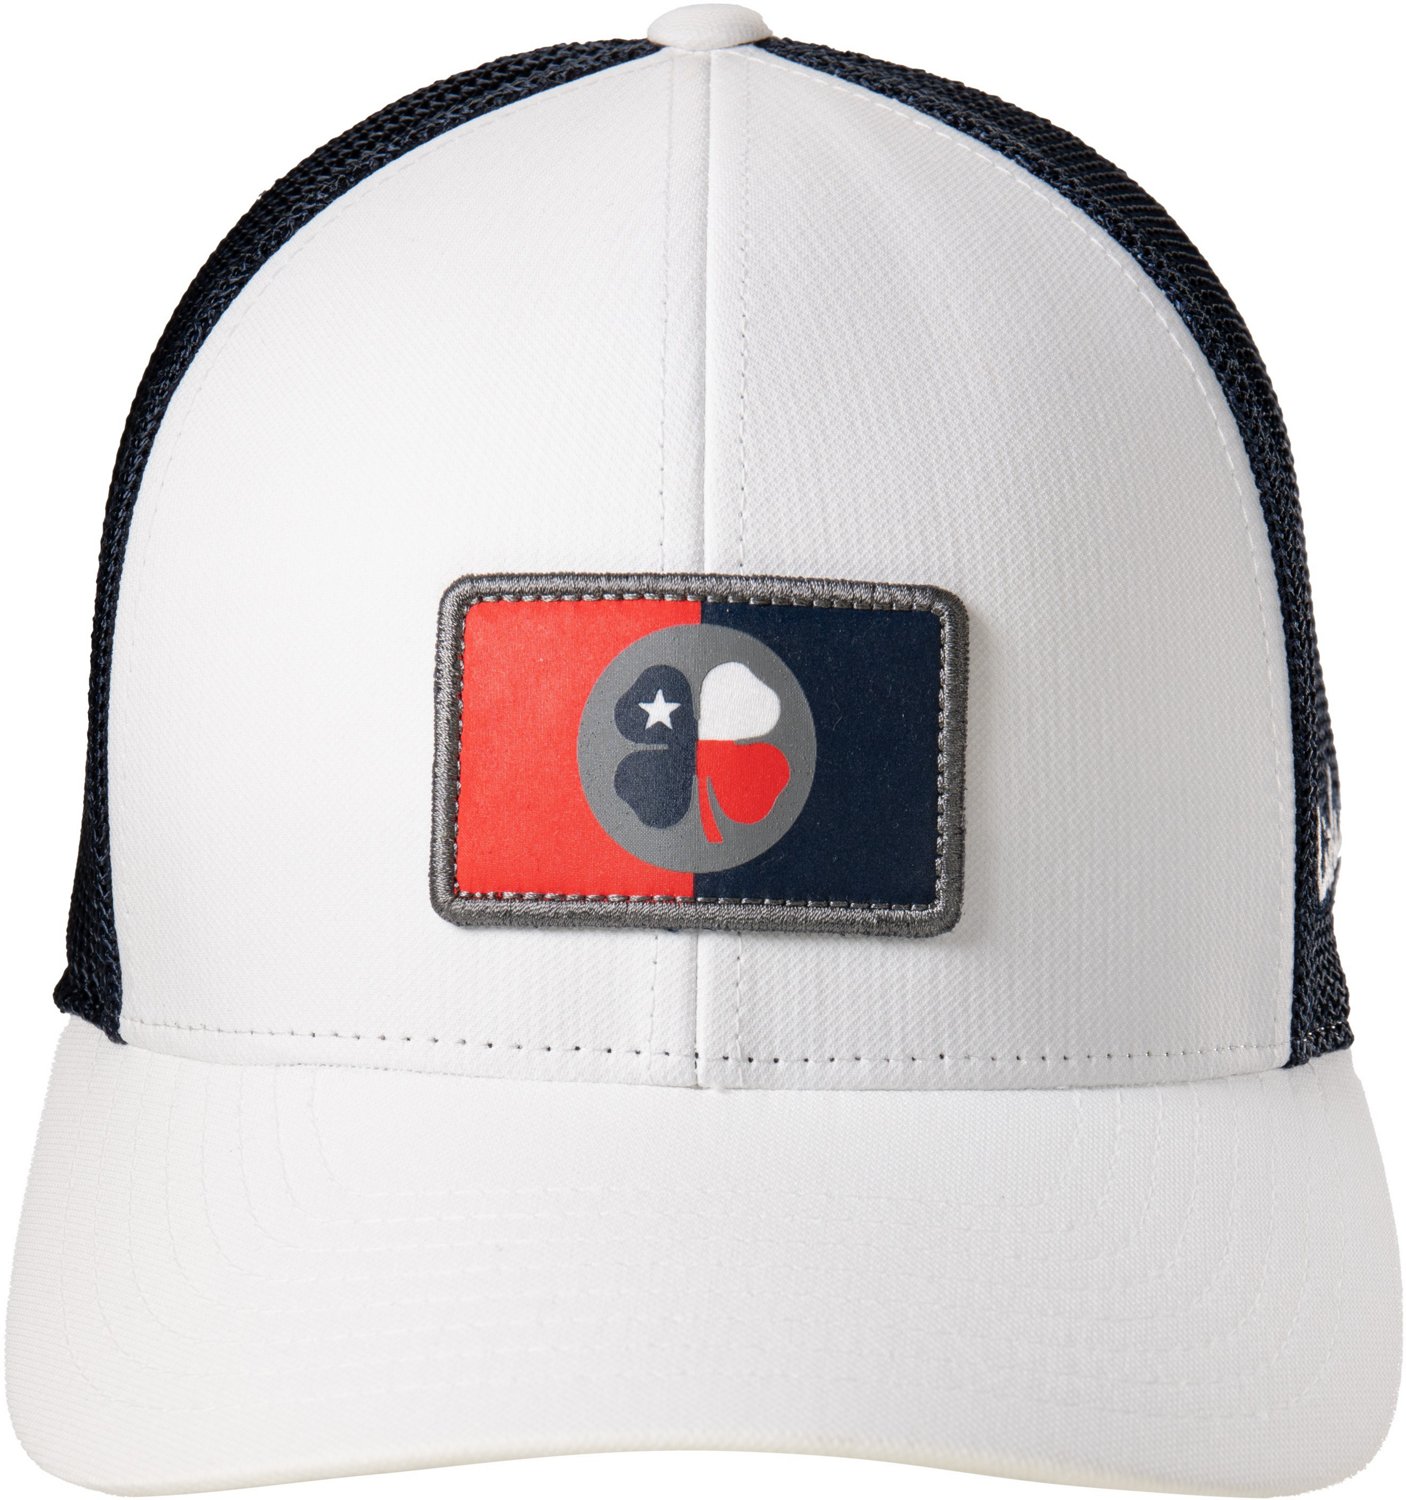 Black Clover Adults State Collection Texas Shield Cap